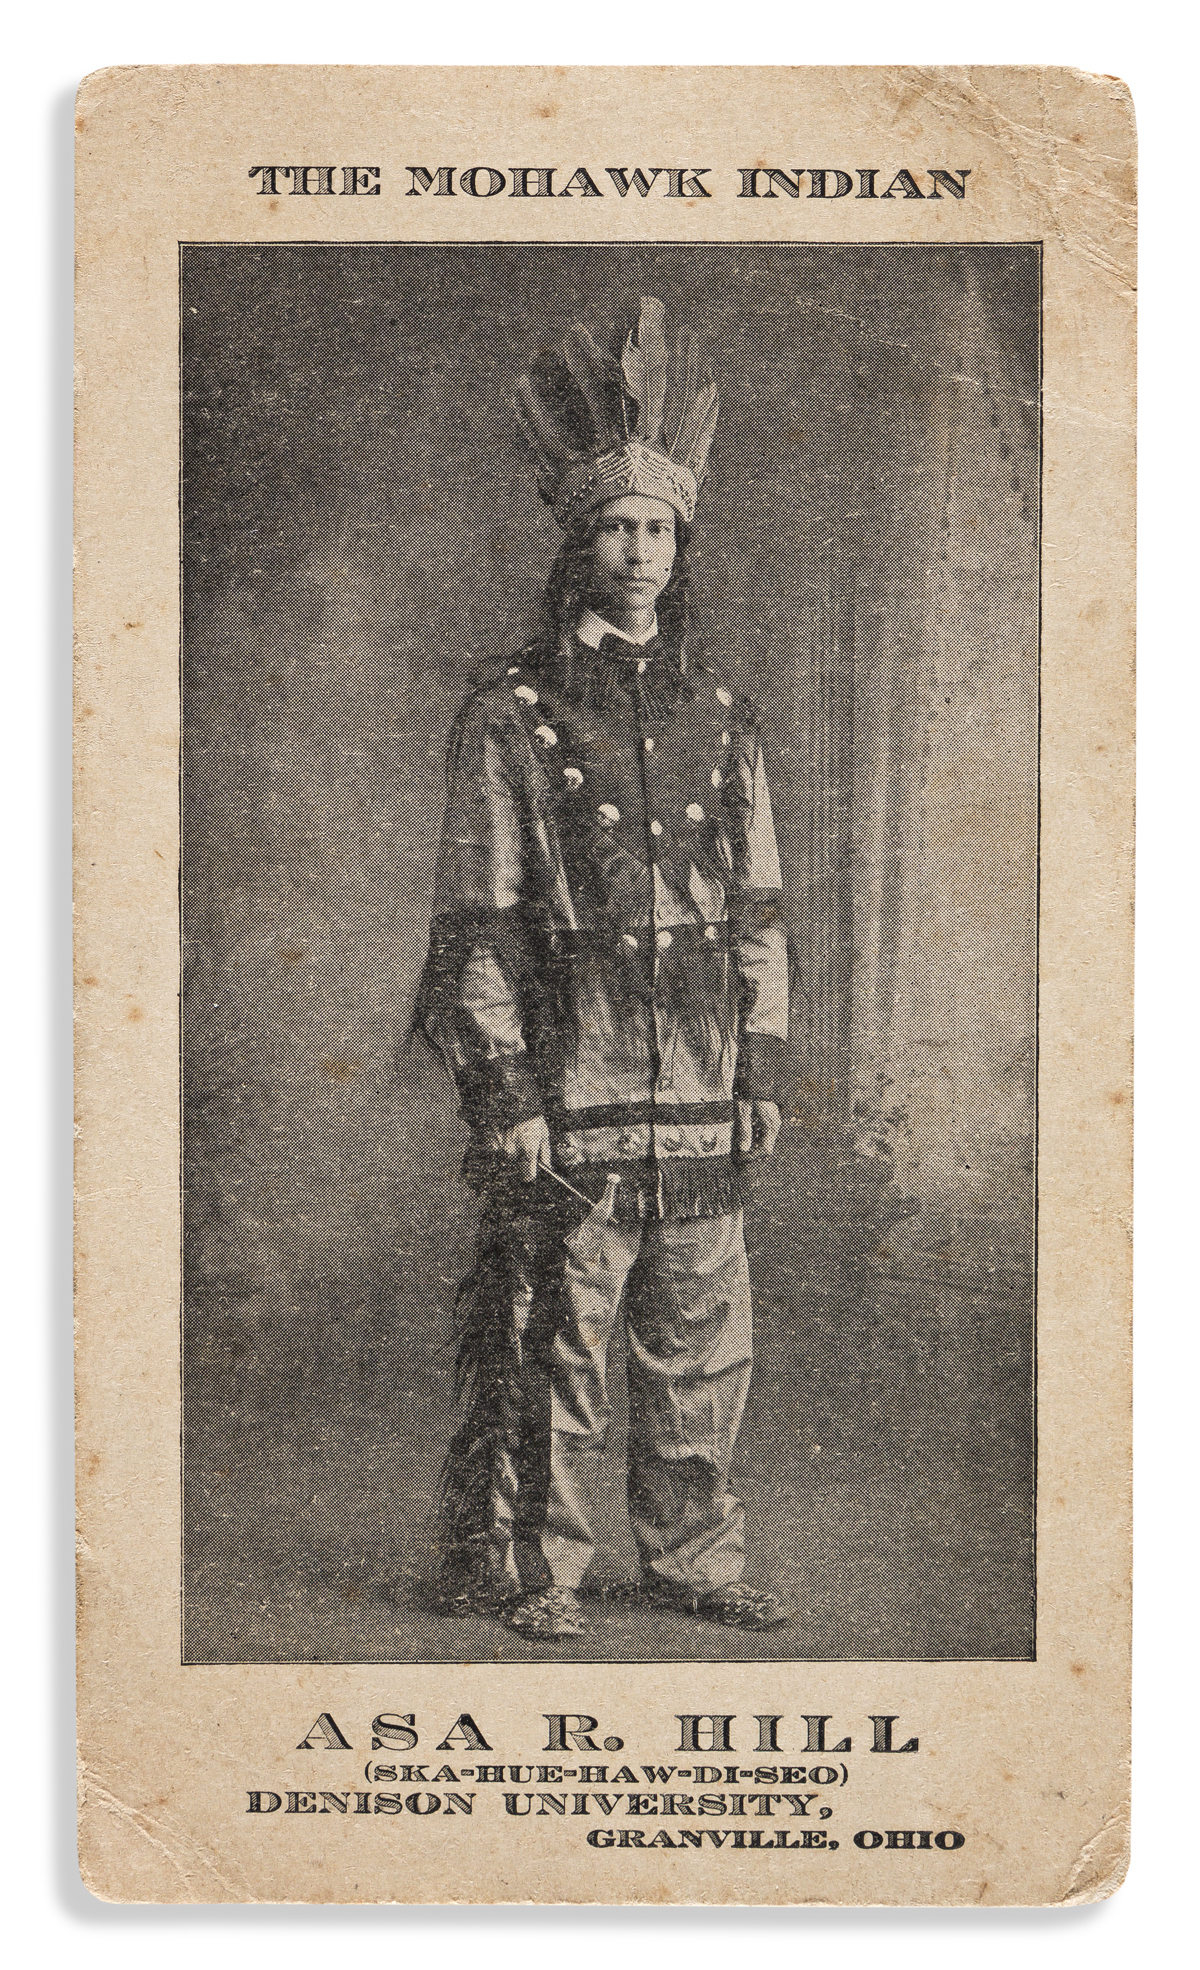 (AMERICAN INDIANS.) Illustrated promotional card for The Mohawk Indian, Asa R. Hill (Ska-Hue-Haw-Di-Seo), Denison University.